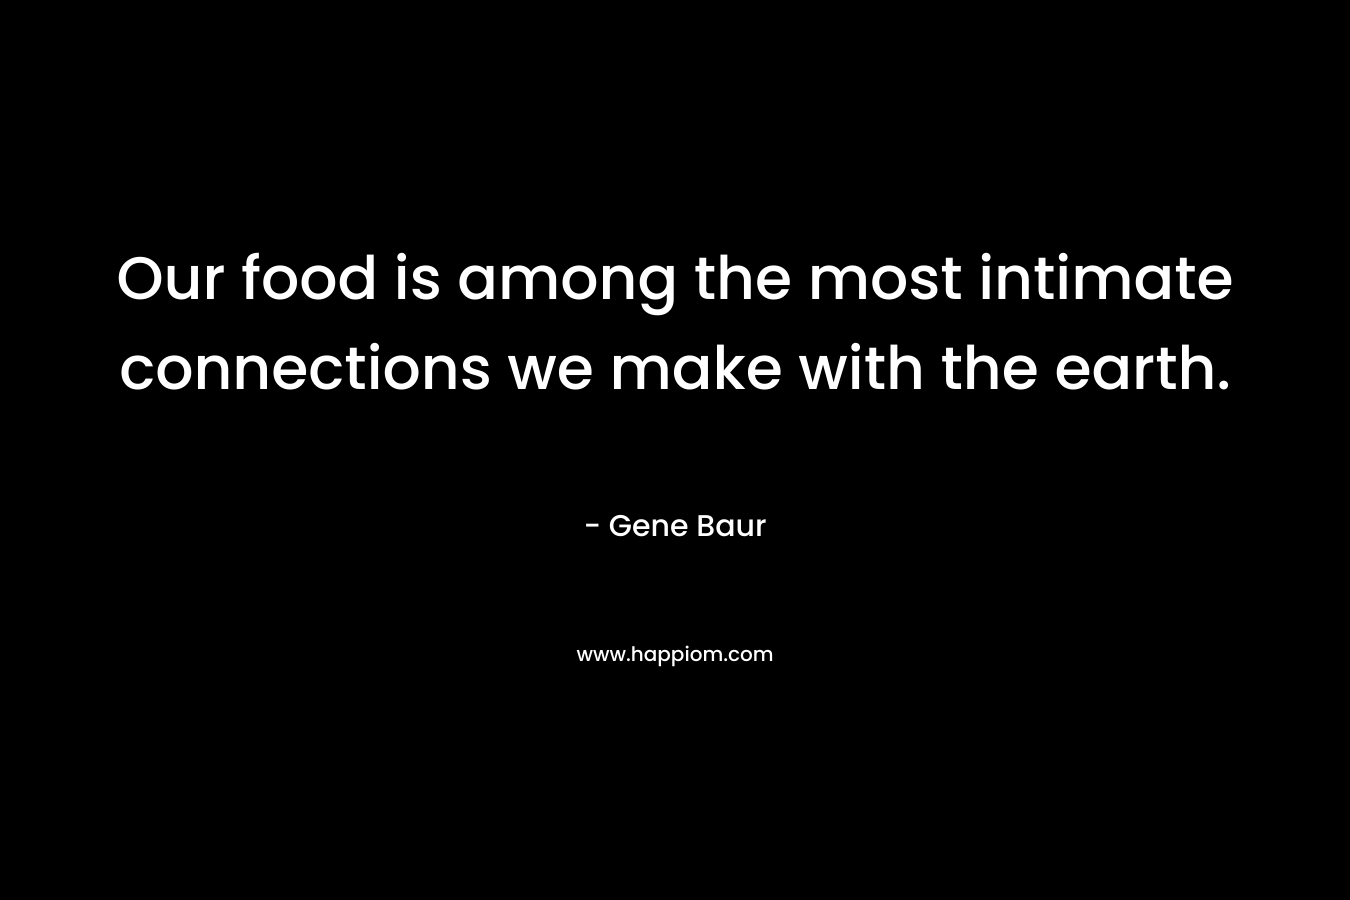 Our food is among the most intimate connections we make with the earth.